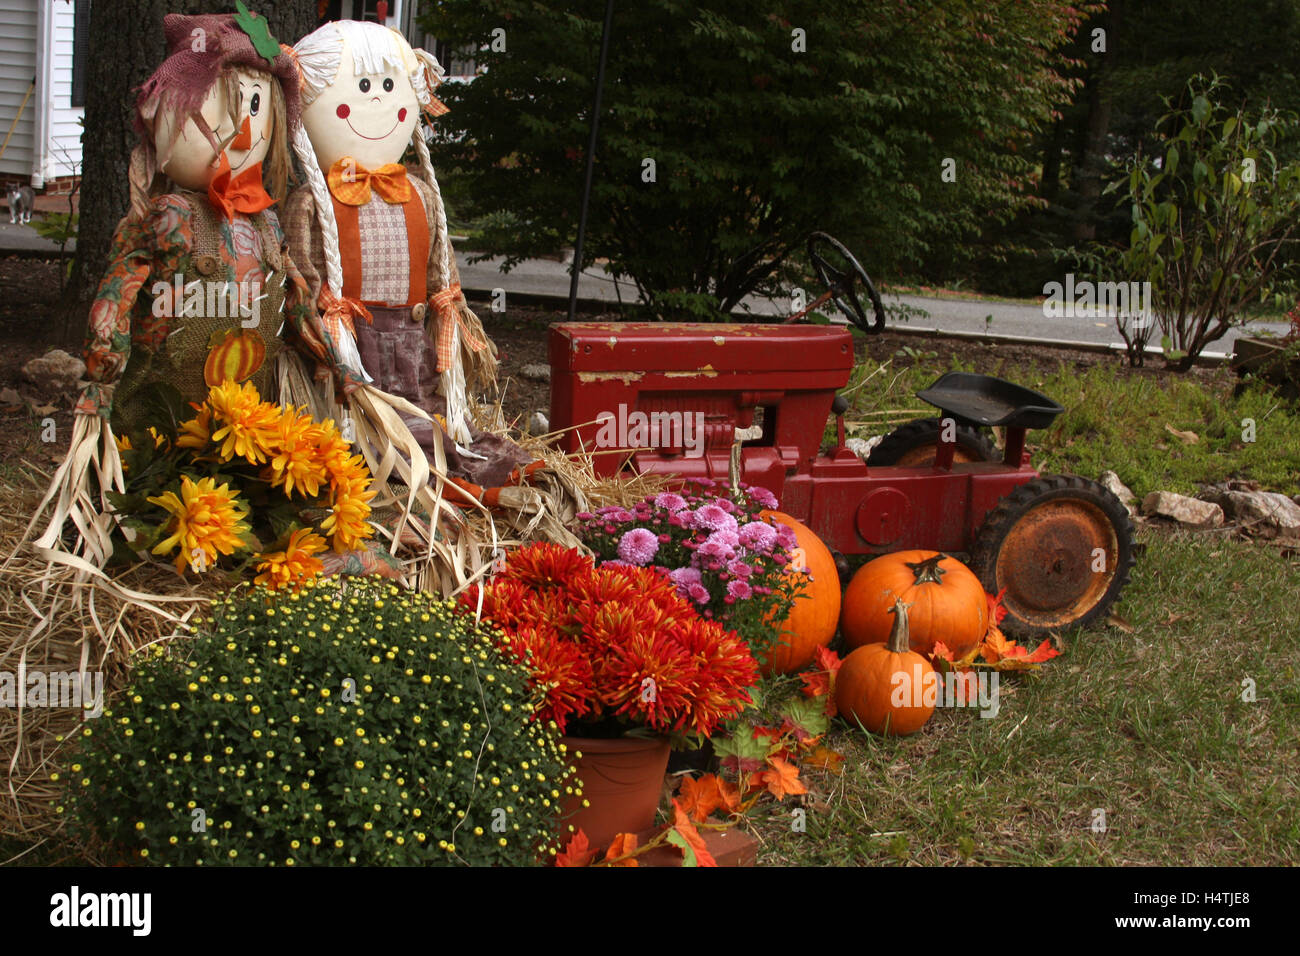 Outdoor Fall Decoration With Scarecrows Mums Tractor And Pumpkins Stock Photo Alamy